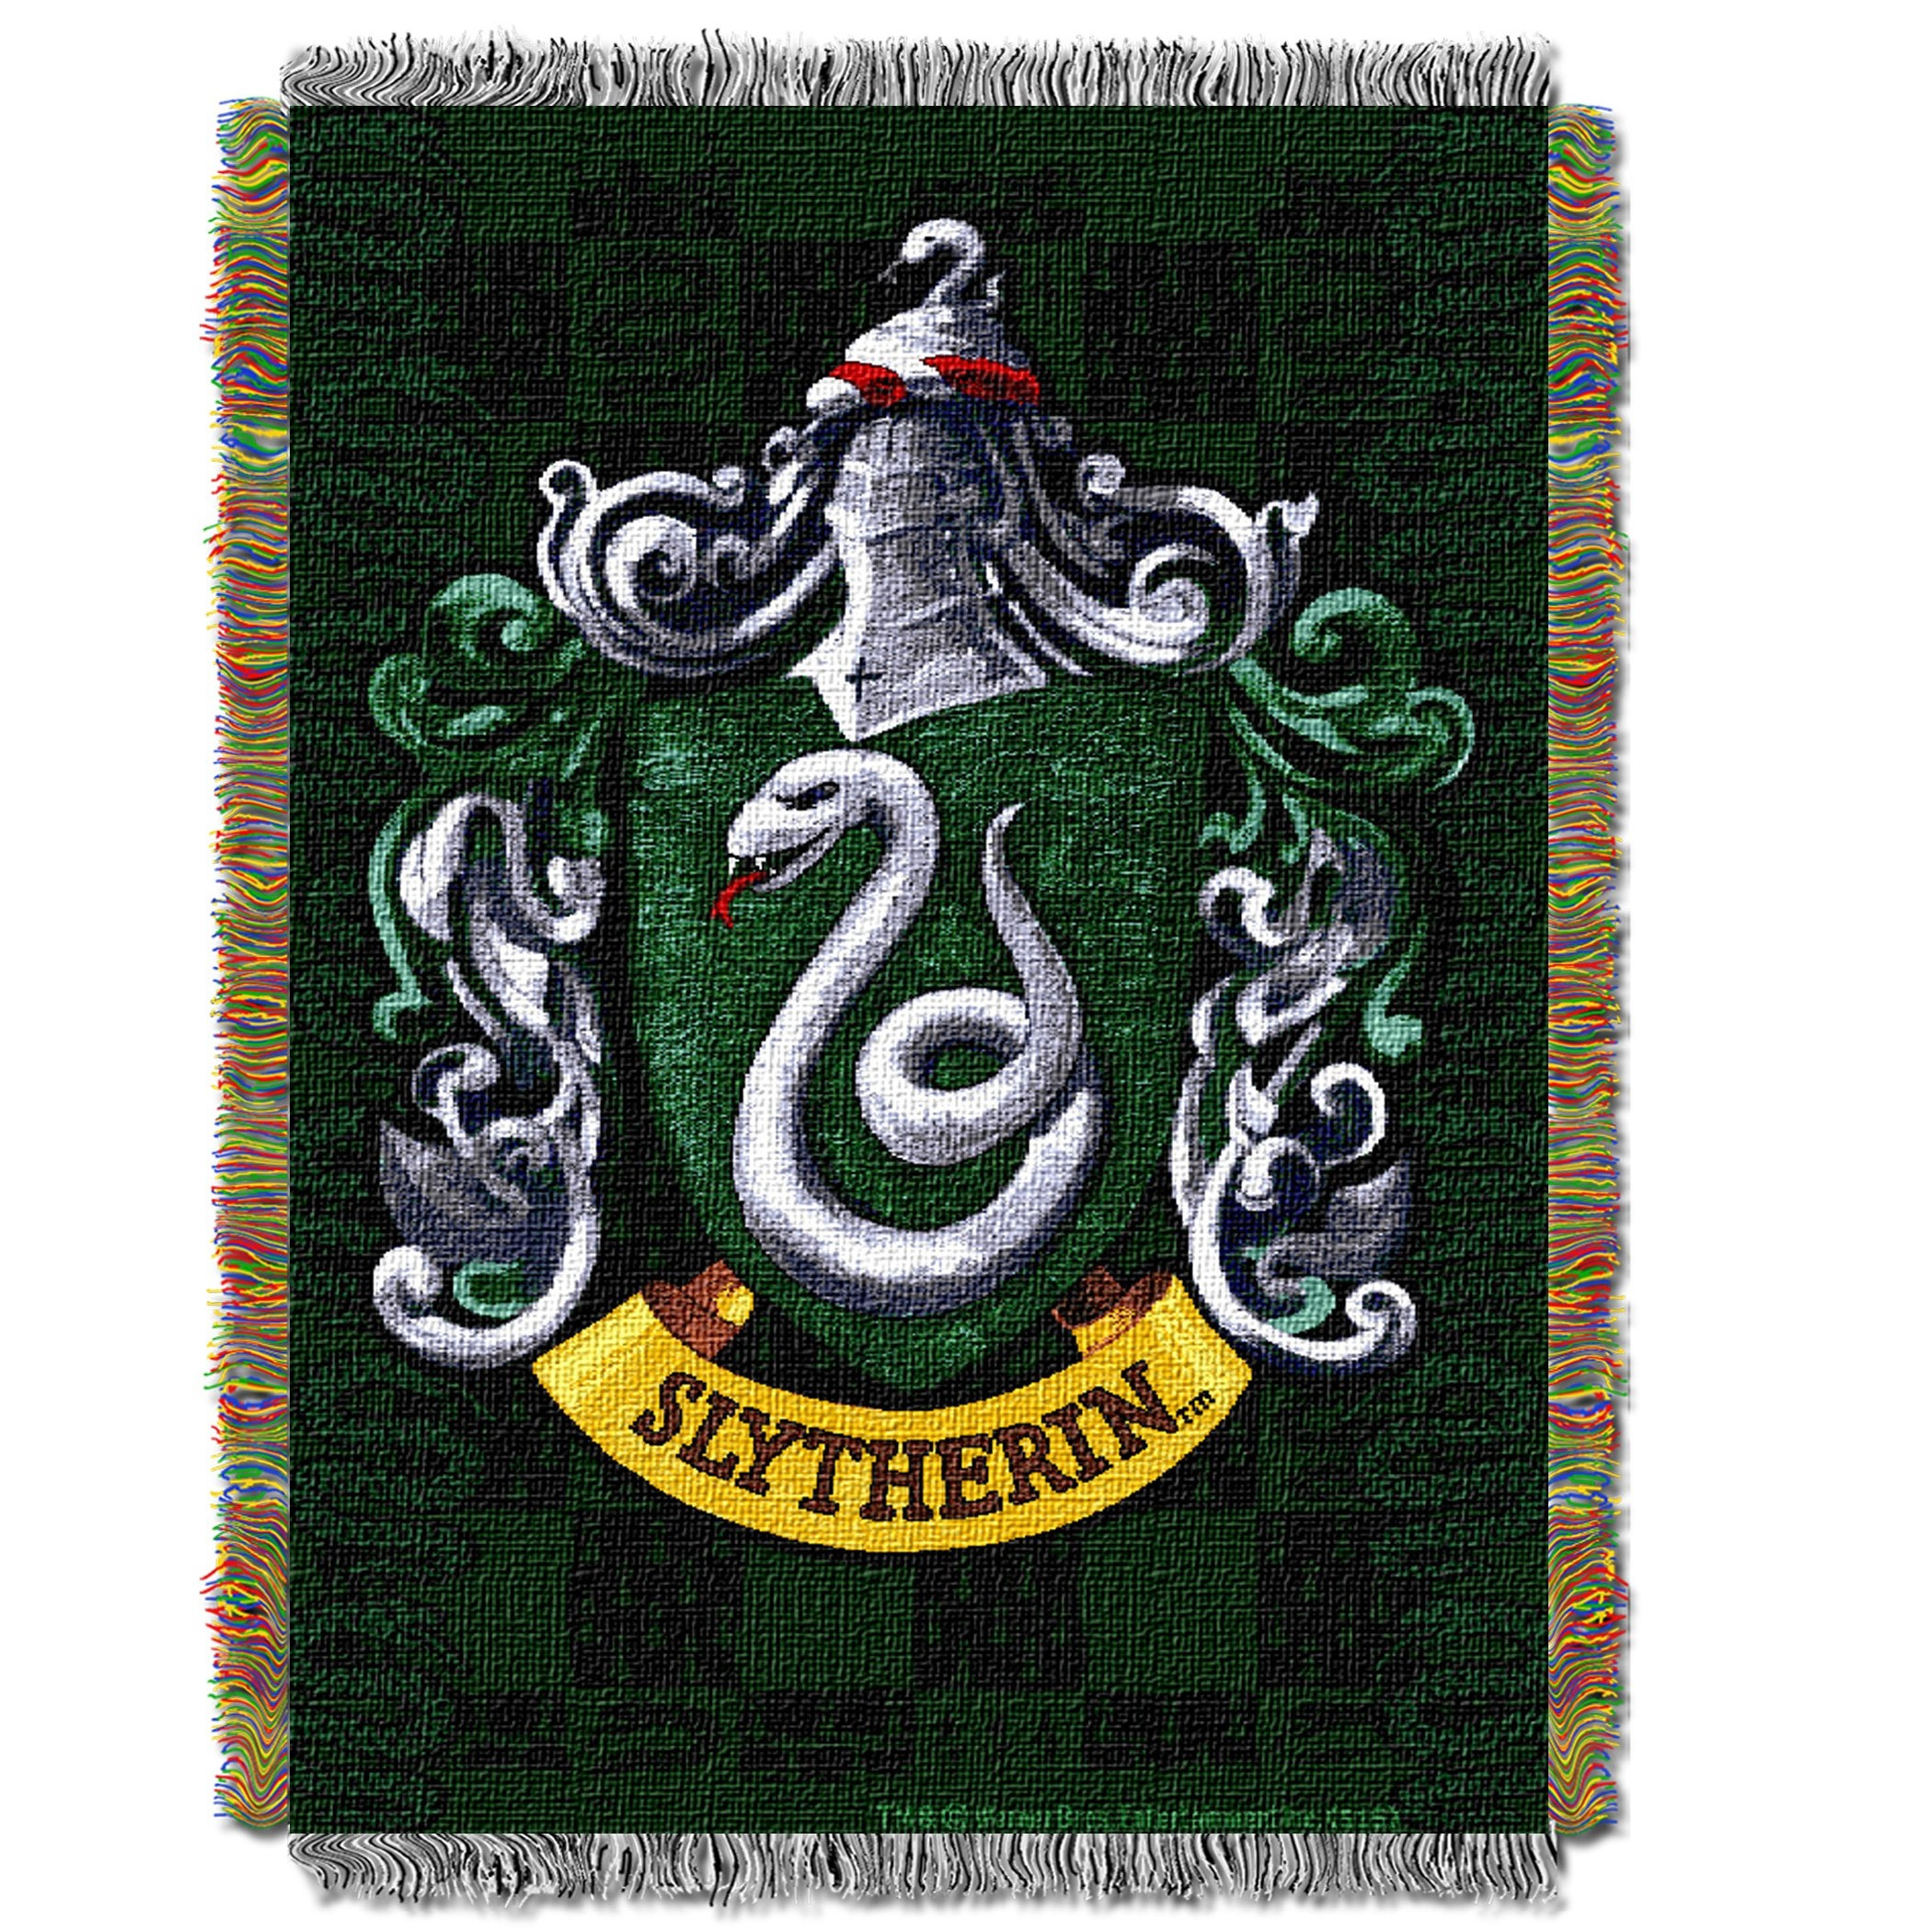 Harry Potter Slytherin Shield Woven Tapestry Throw Blanket 48" x 60"